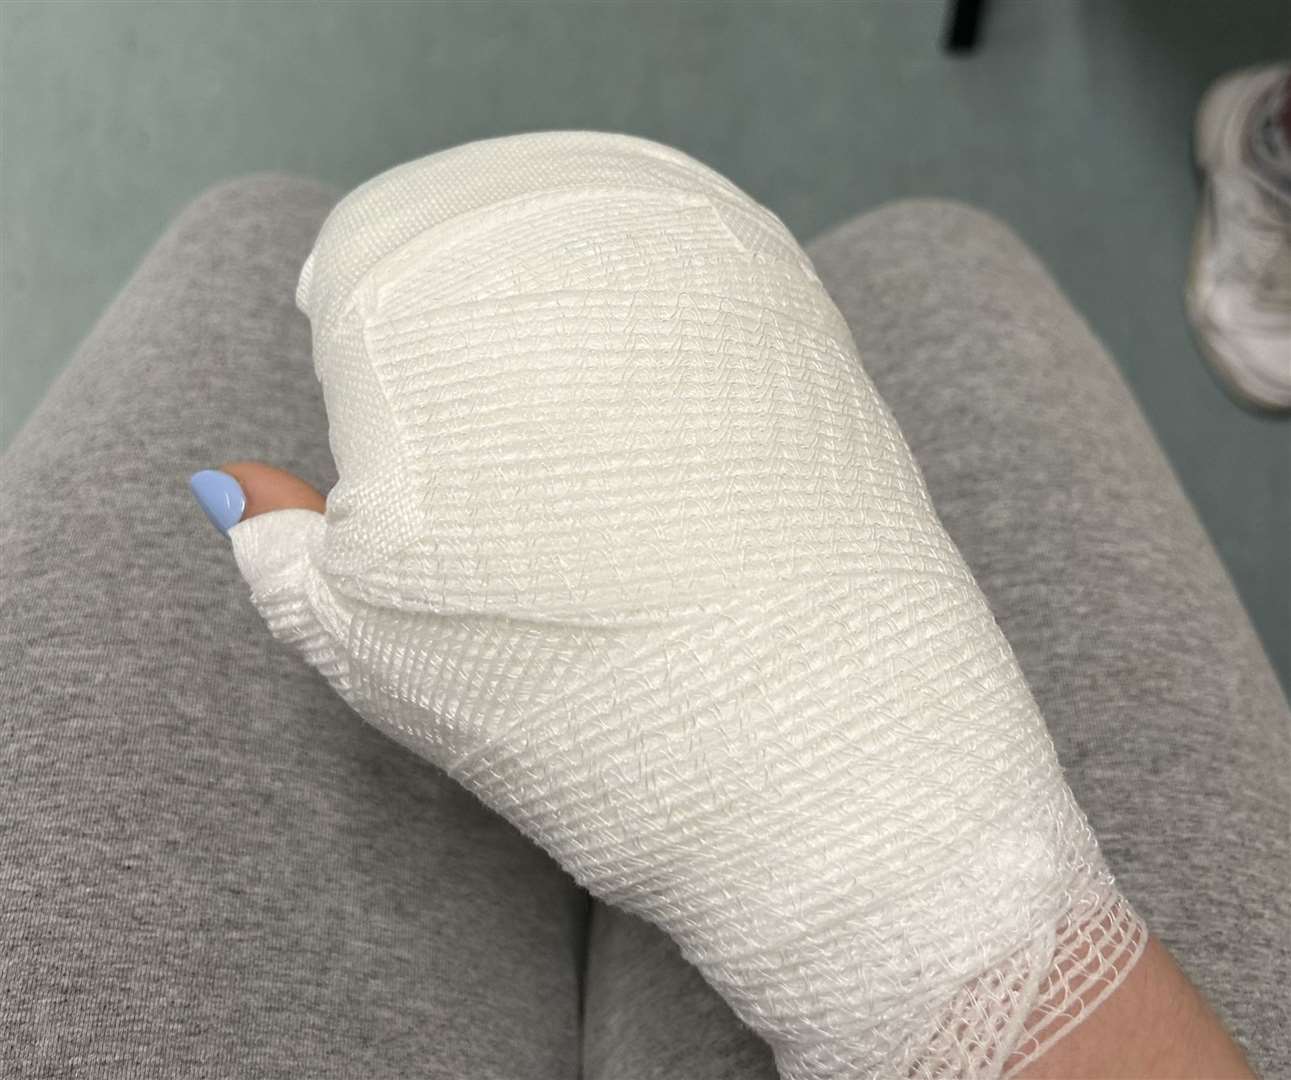 Lucy Jones got her hands wrapped at a pharmacy in Spain before going to A&E in Maidstone. Picture: Kennedy News